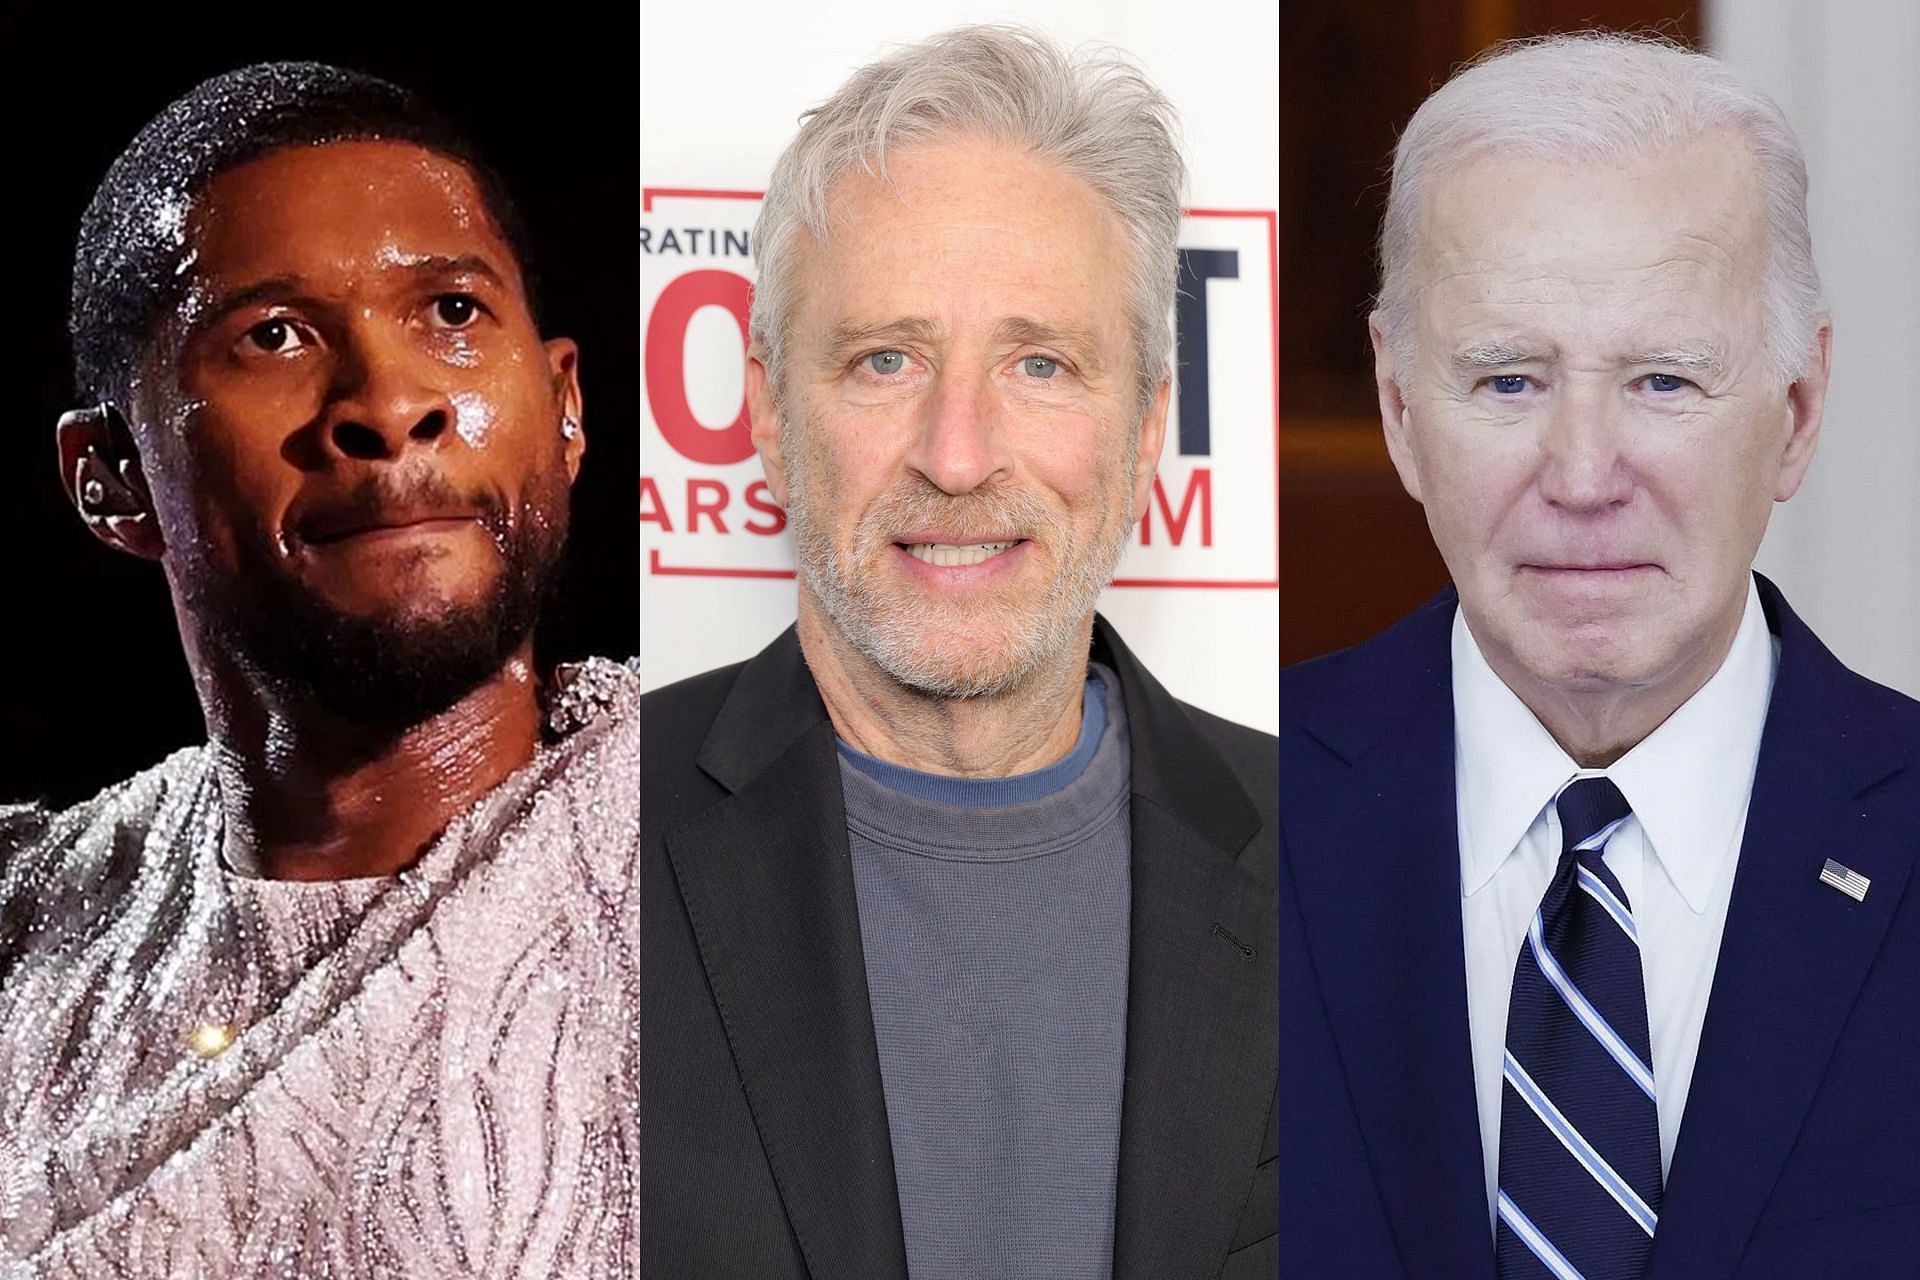 Usher catches strays from Jon Stewart as Daily Show host compares Joe Biden to Super Bowl halftime show